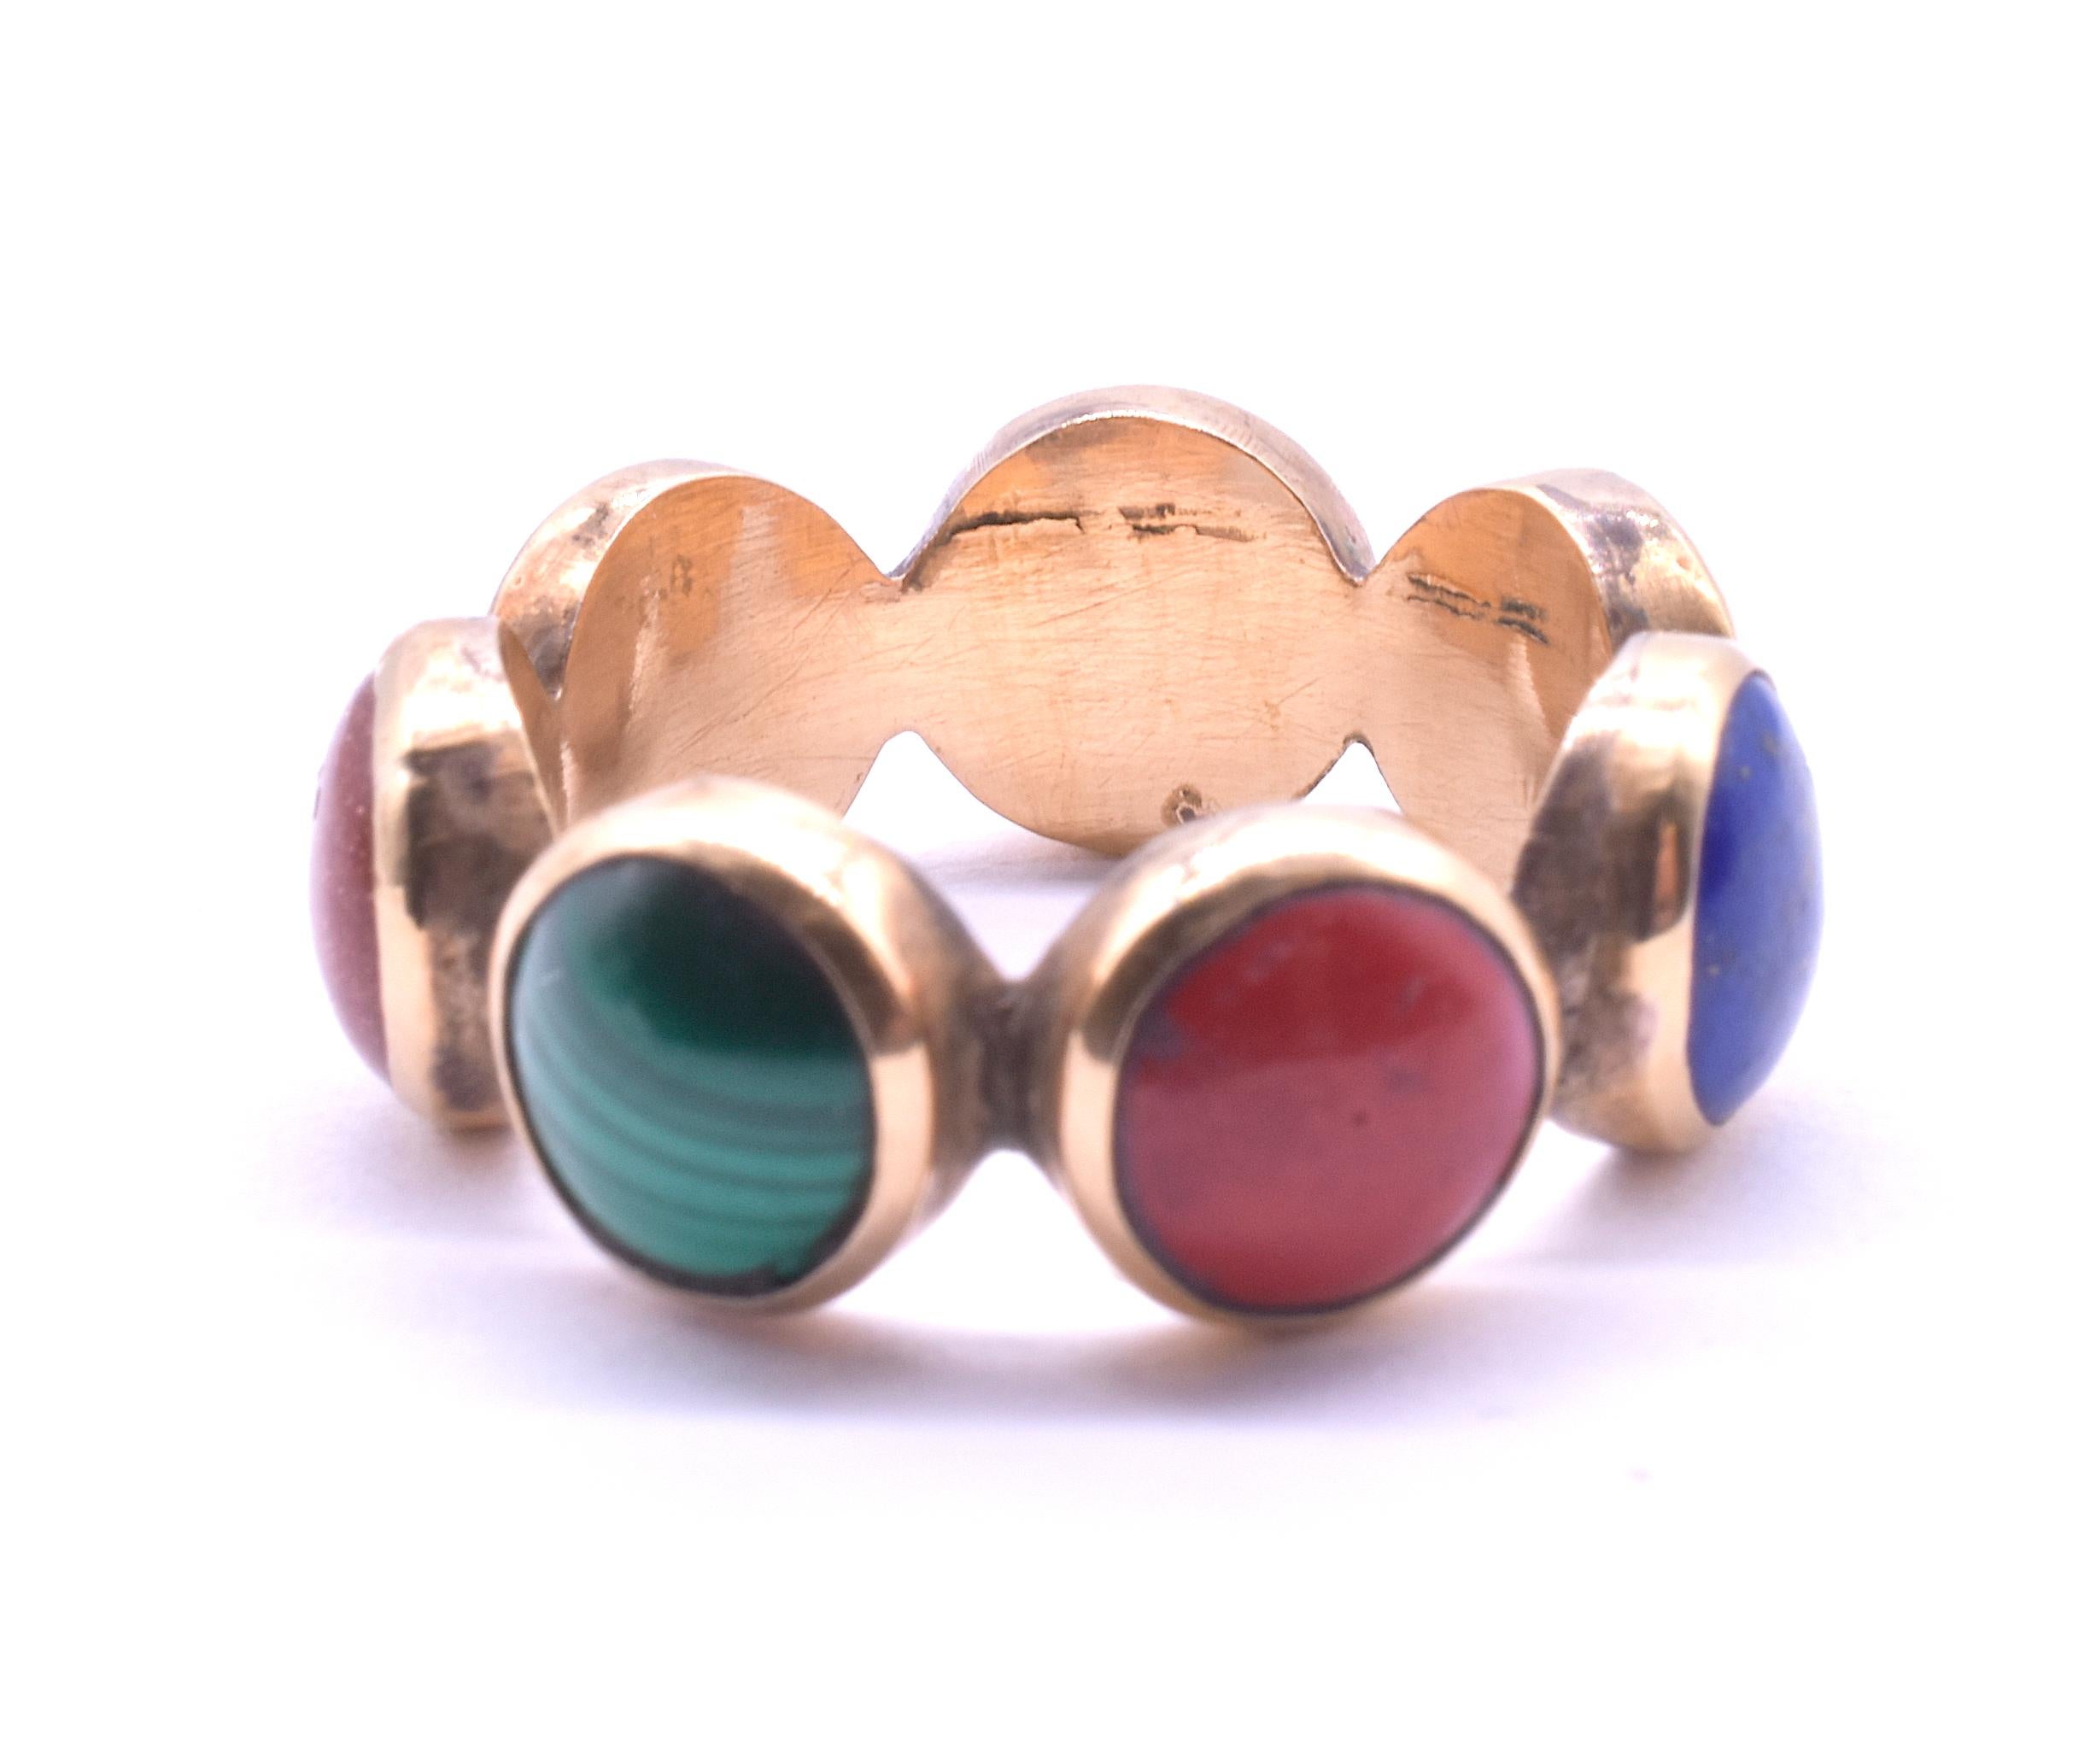 Our rare Georgian planetary ring is made up of seven stones cut and polished en cabochon; 2 lapiz lazuli (blue), 2 goldstone (glass with copper flecks), 2 malachite (green) and a red agate. The stones are set in 18K. The stones represent the